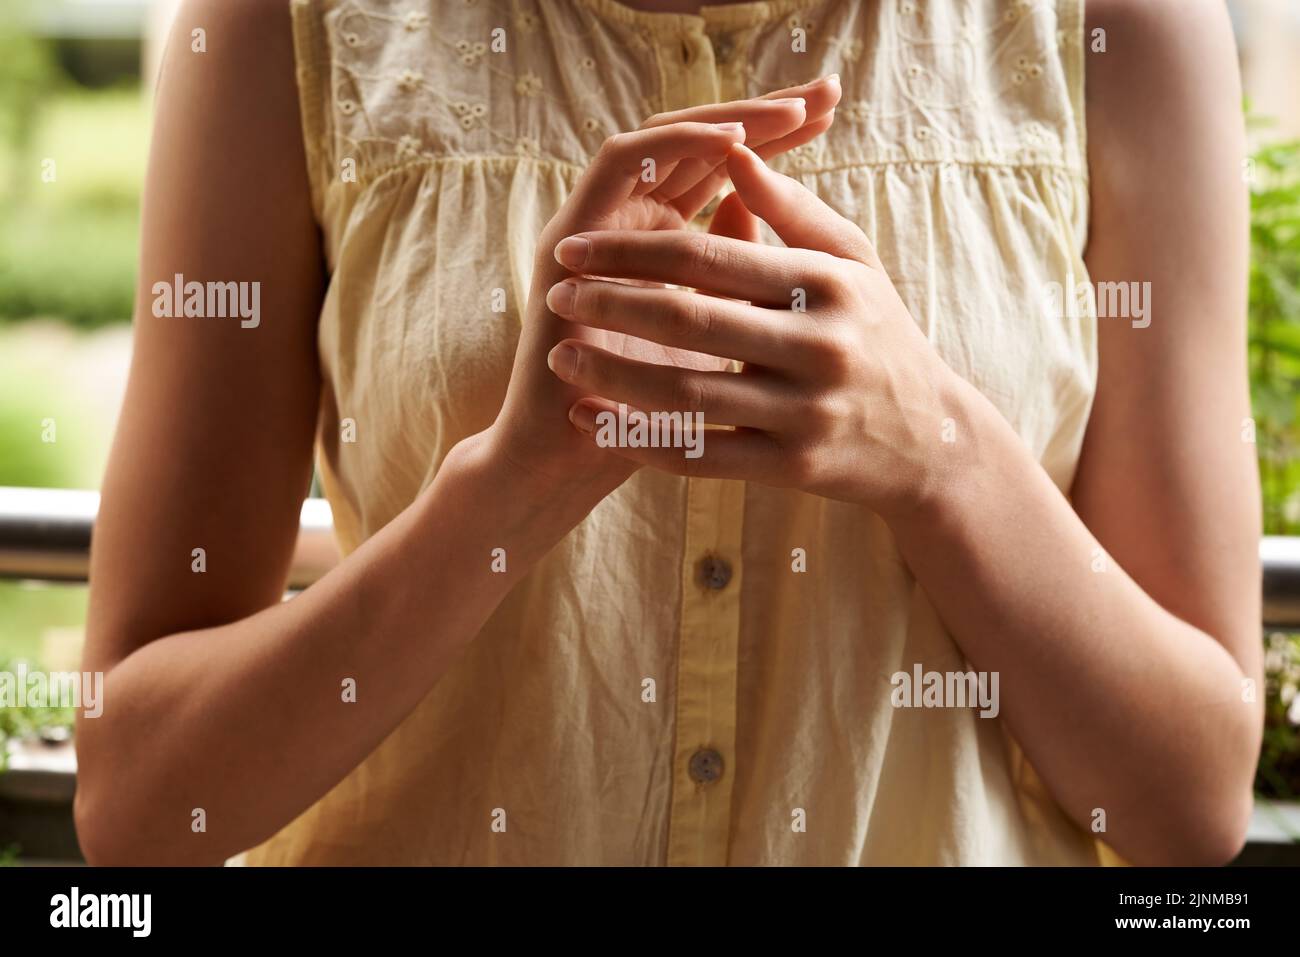 Girl doing EFT or emotional freedom technique - tapping on the side of the hand point Stock Photo